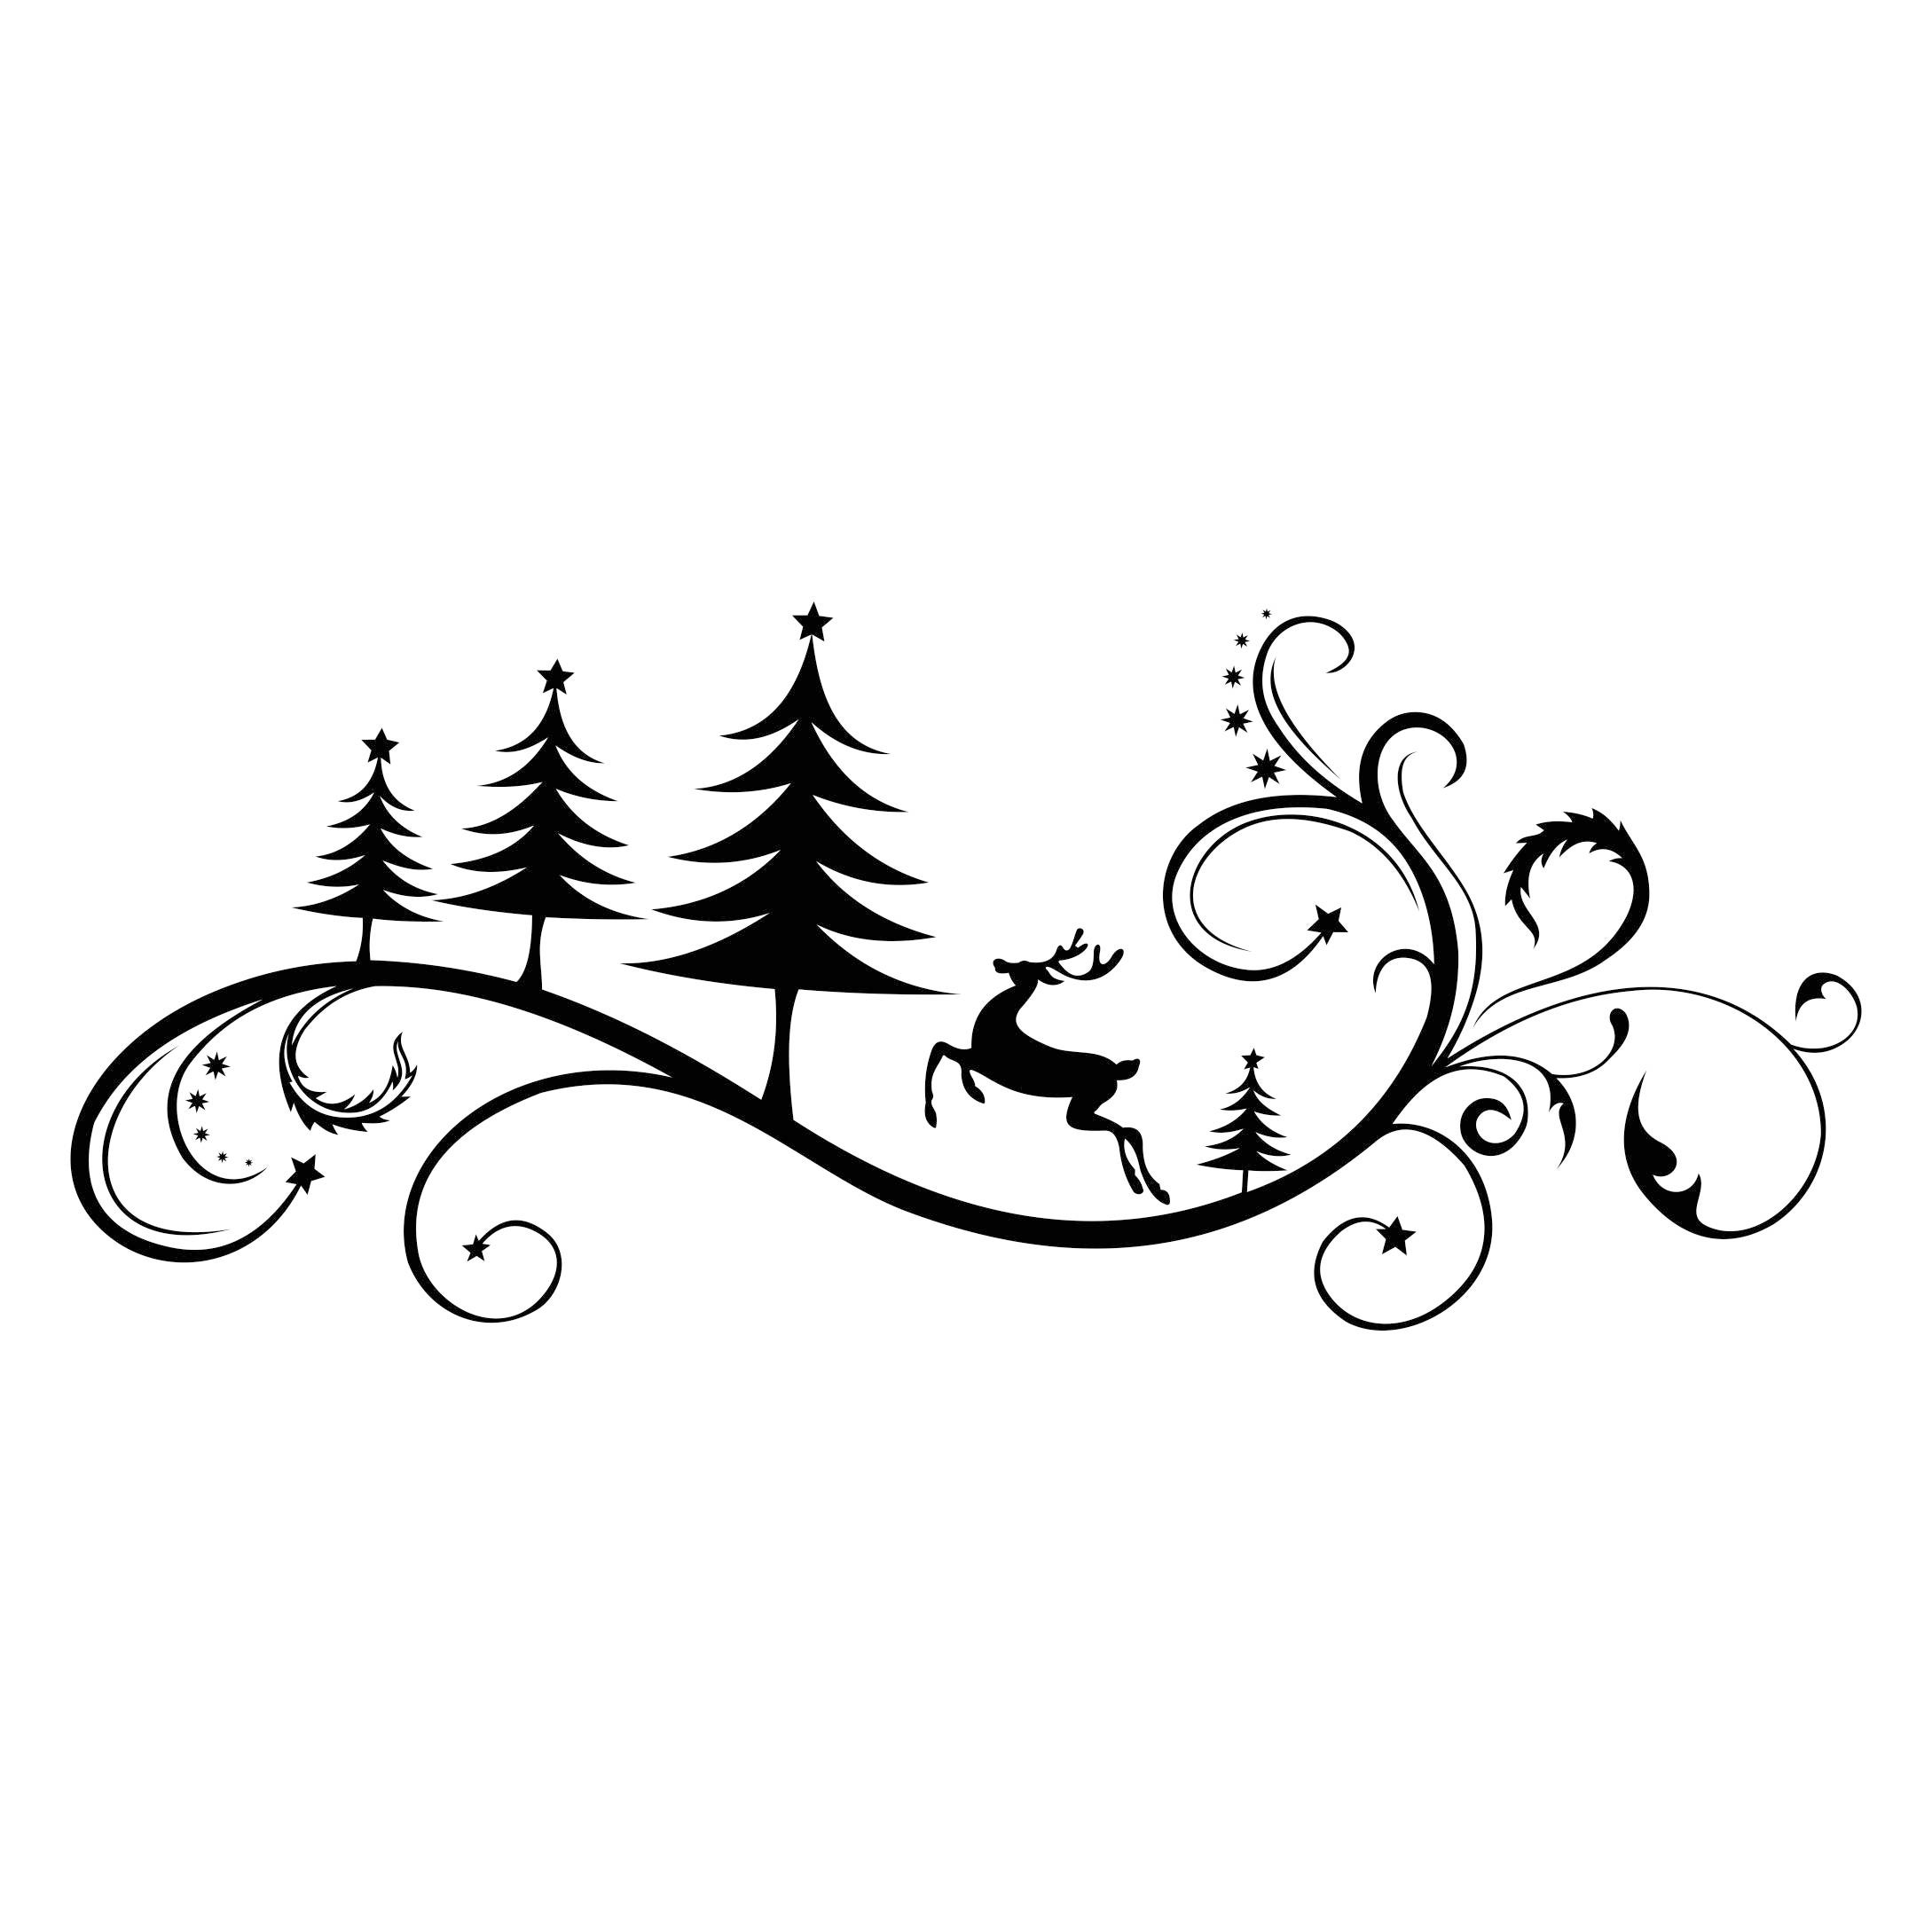 Download Christmas Ornament Deer Graphics SVG Dxf EPS Png Cdr Ai ...